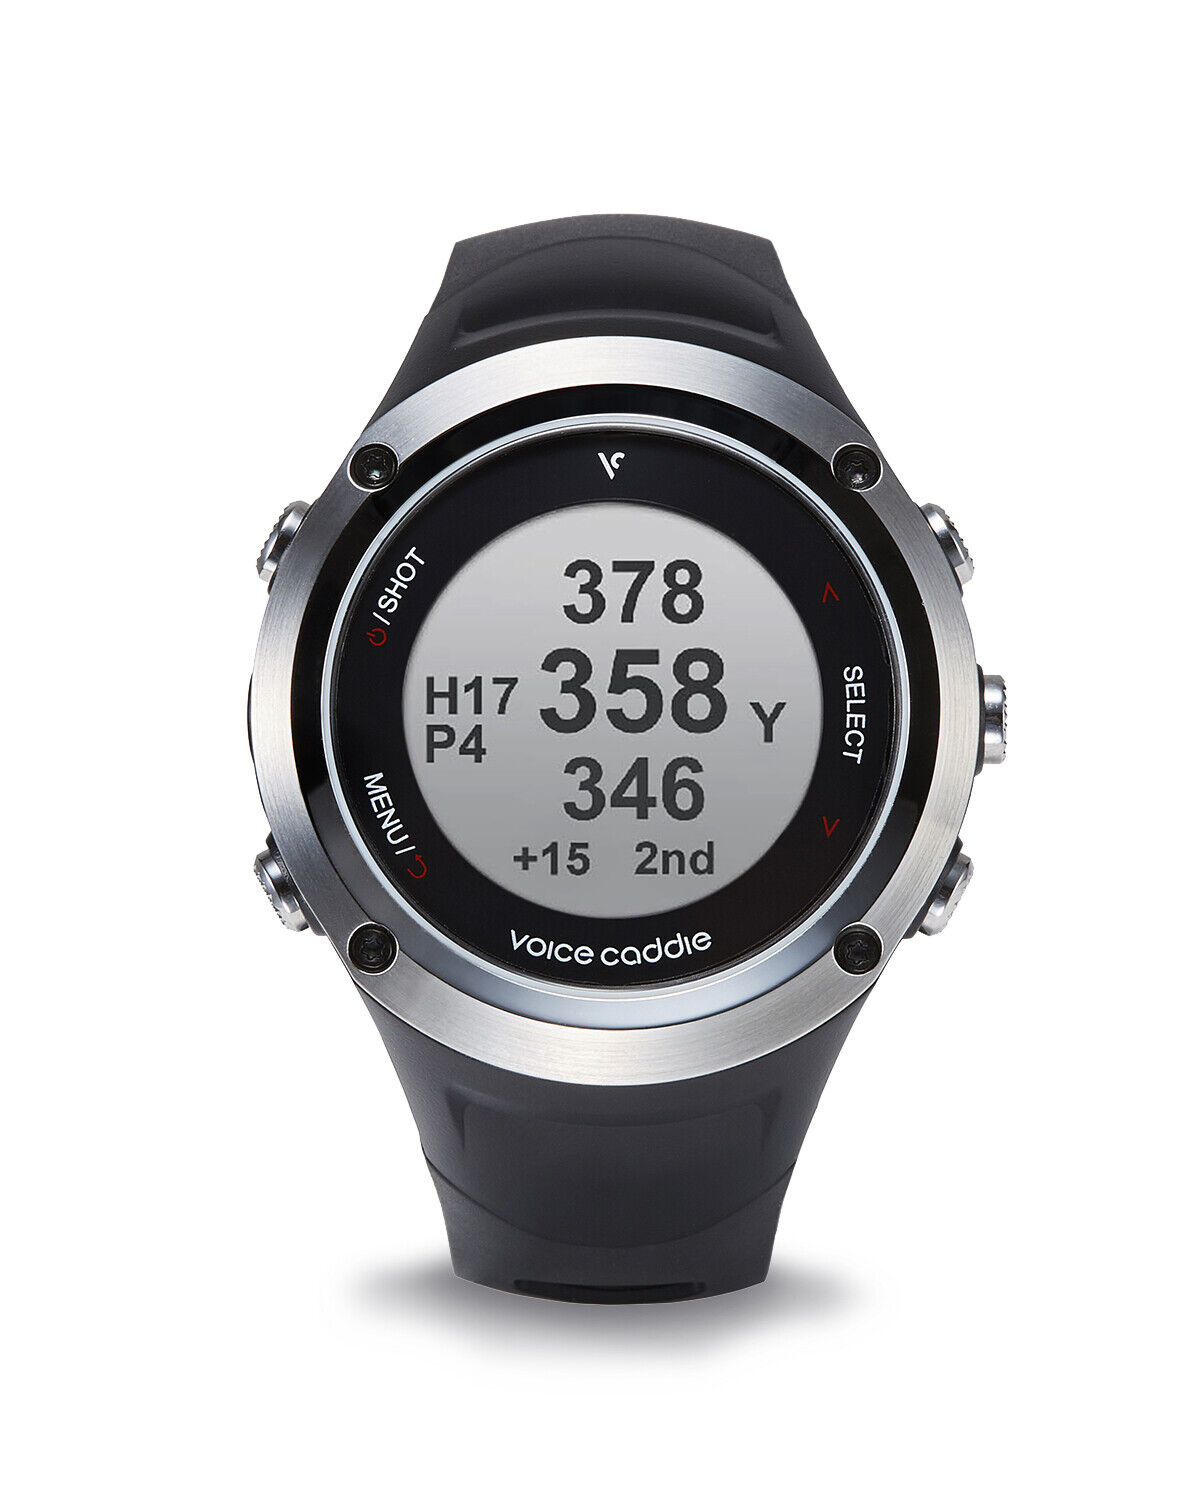 Voice Caddie G2 GPS Watch with Slope Compensation